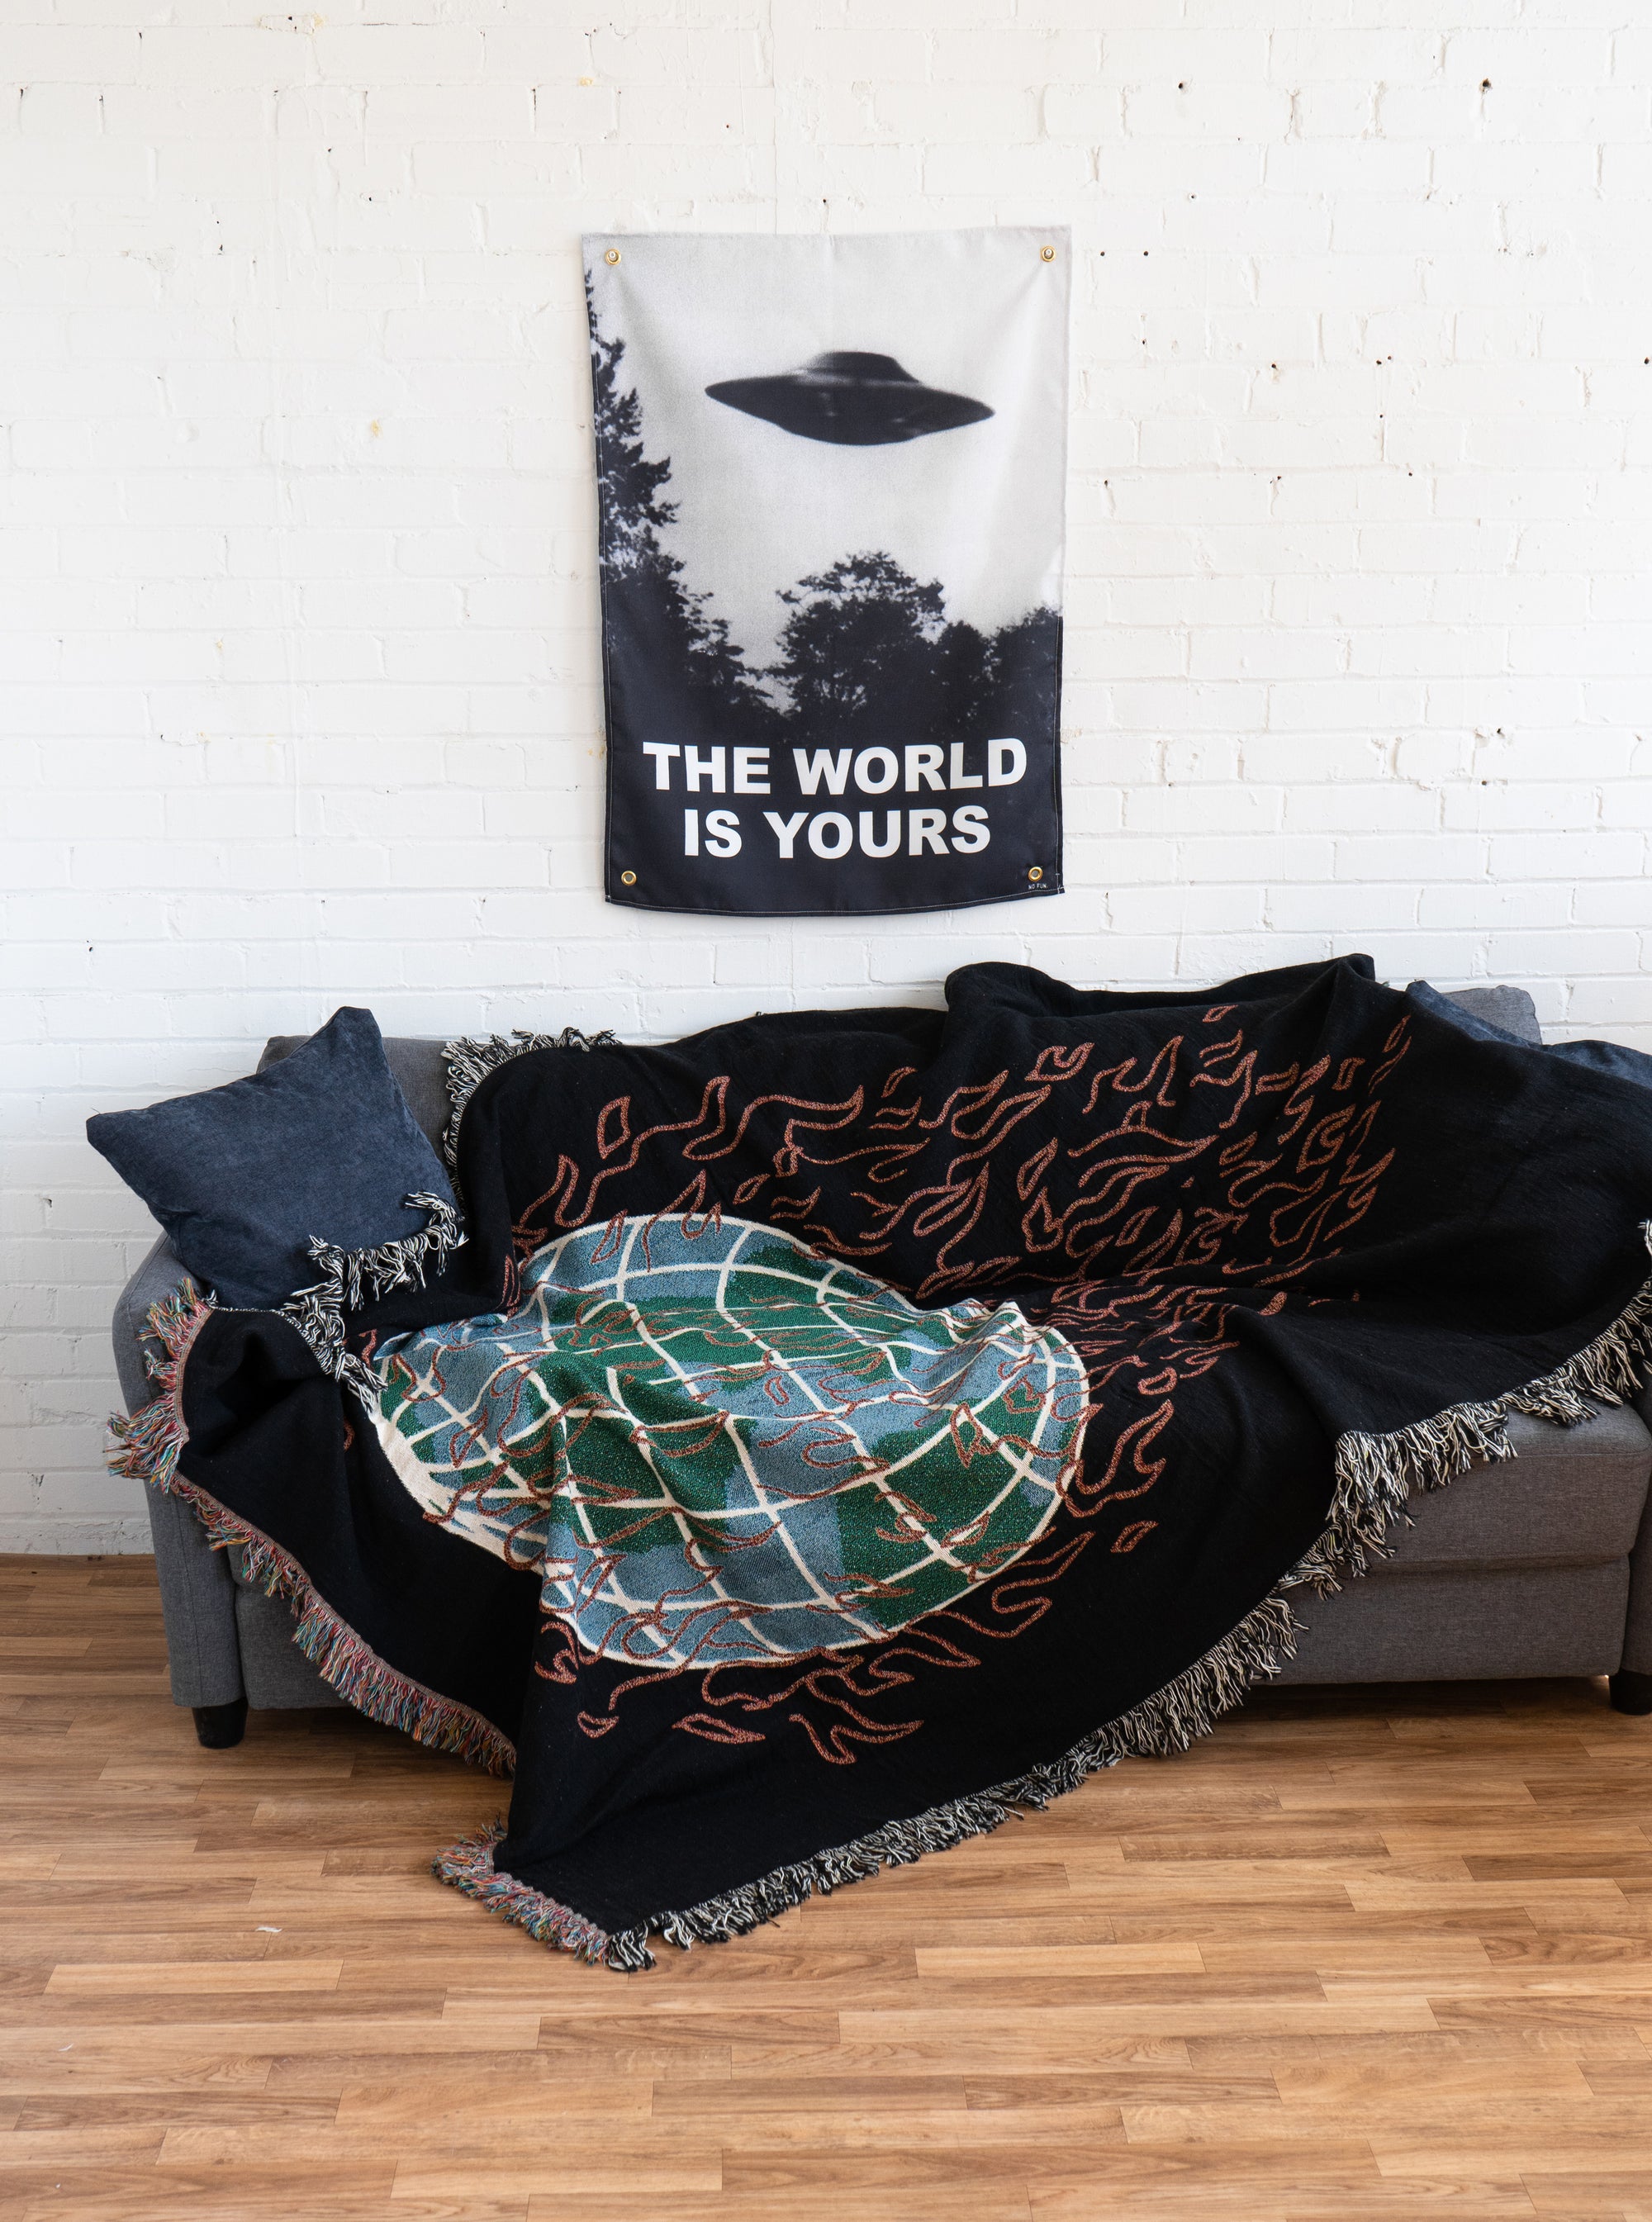 The "Global Warming" Woven Blanket by No Fun® on a grey couch in an untidy manner.  The couch is in a white room that has hardwood floor.  There is a wall tapestry hanging on the wall above the couch.